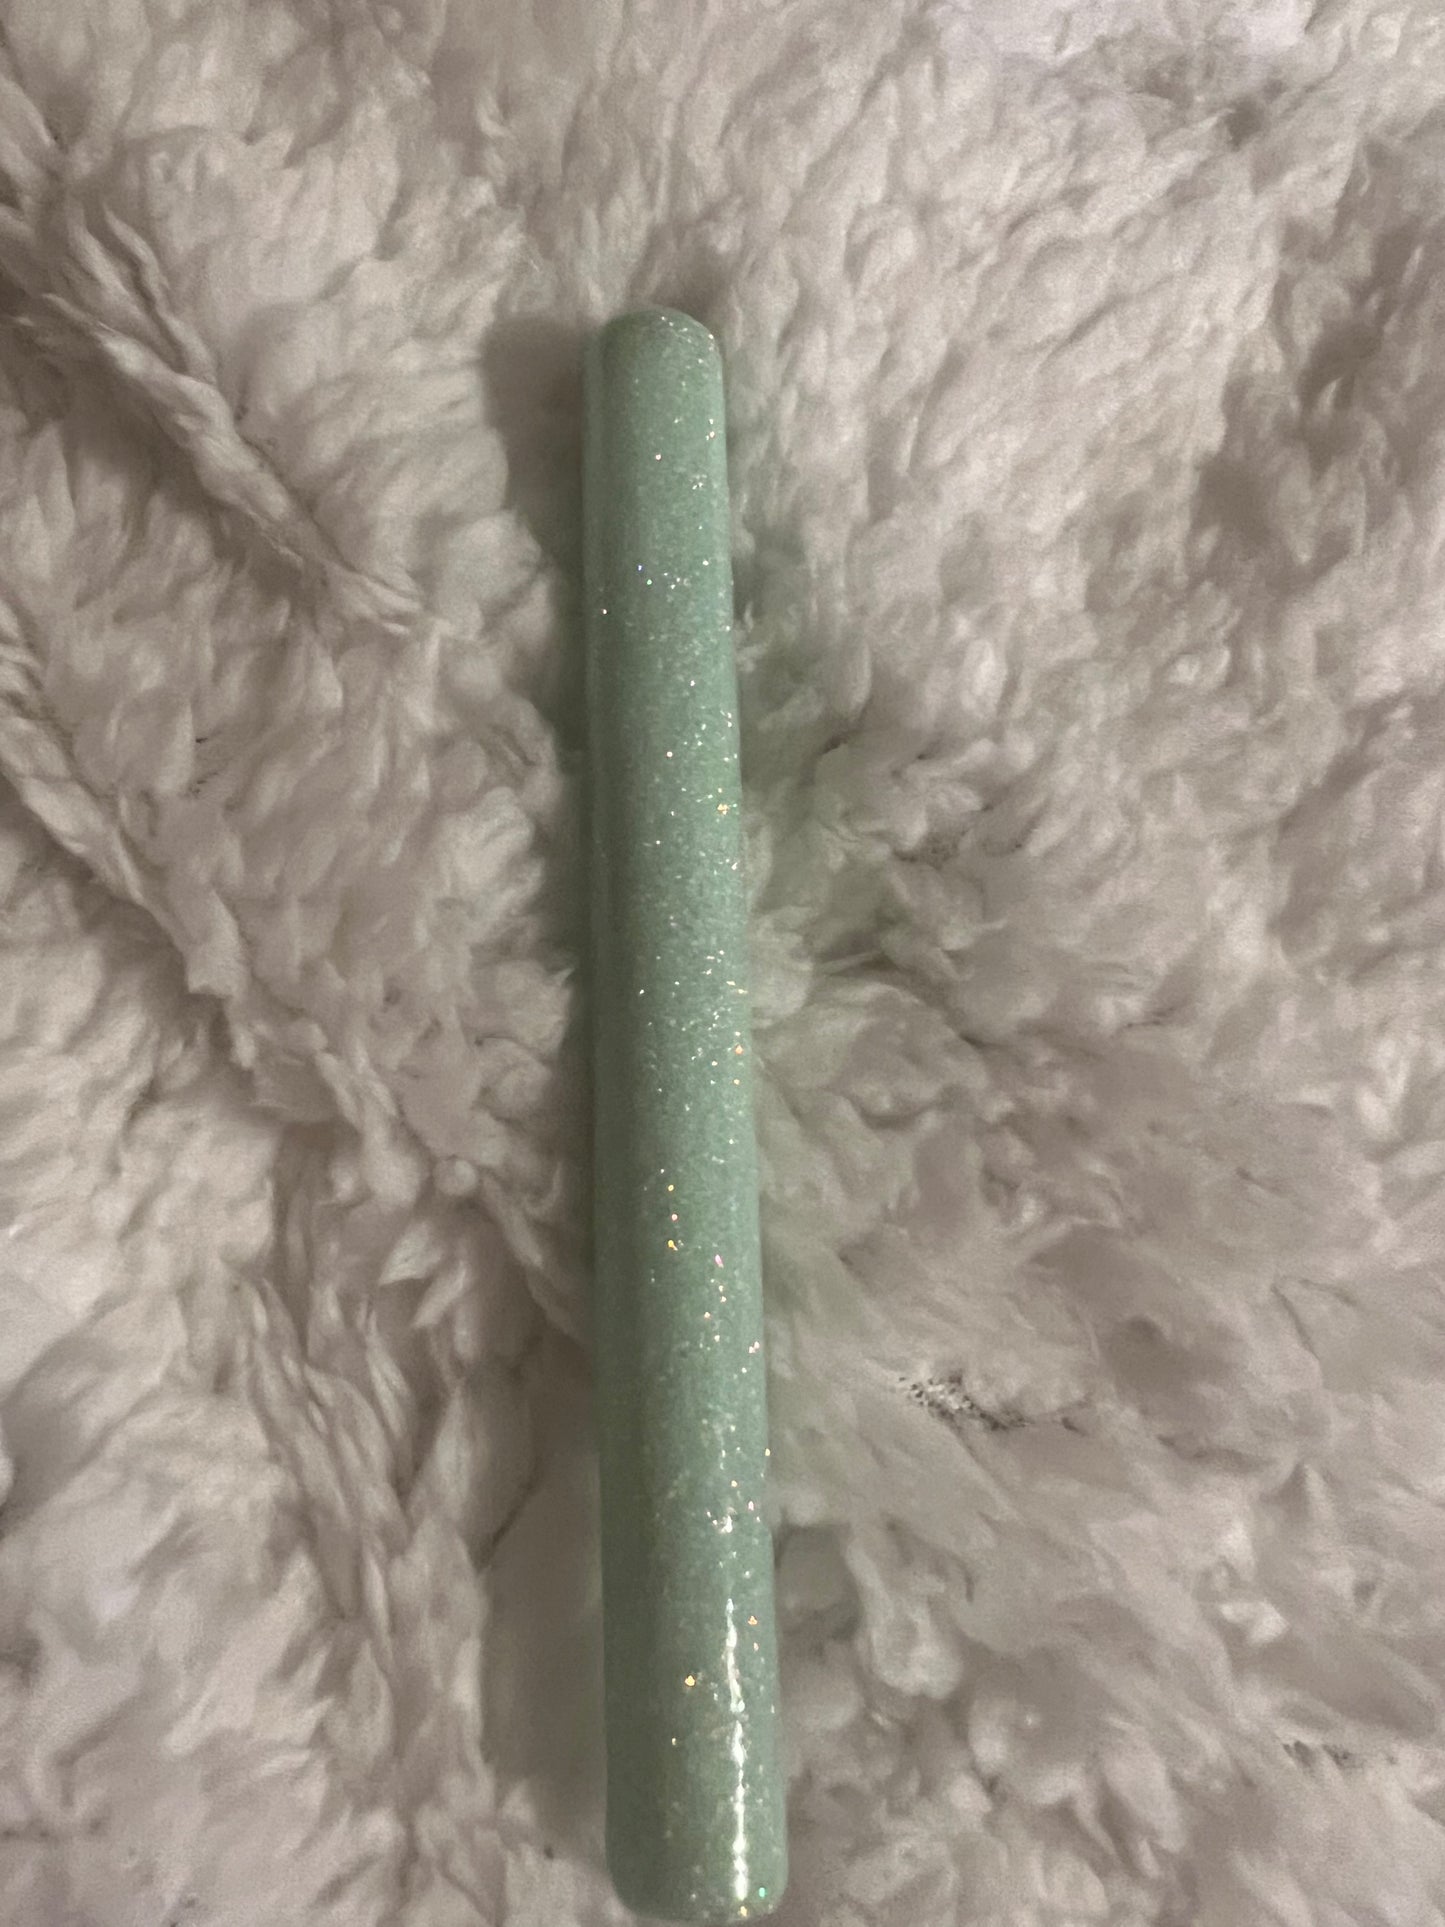 Green Glow Glitter Pen Base for Hydro Dipping